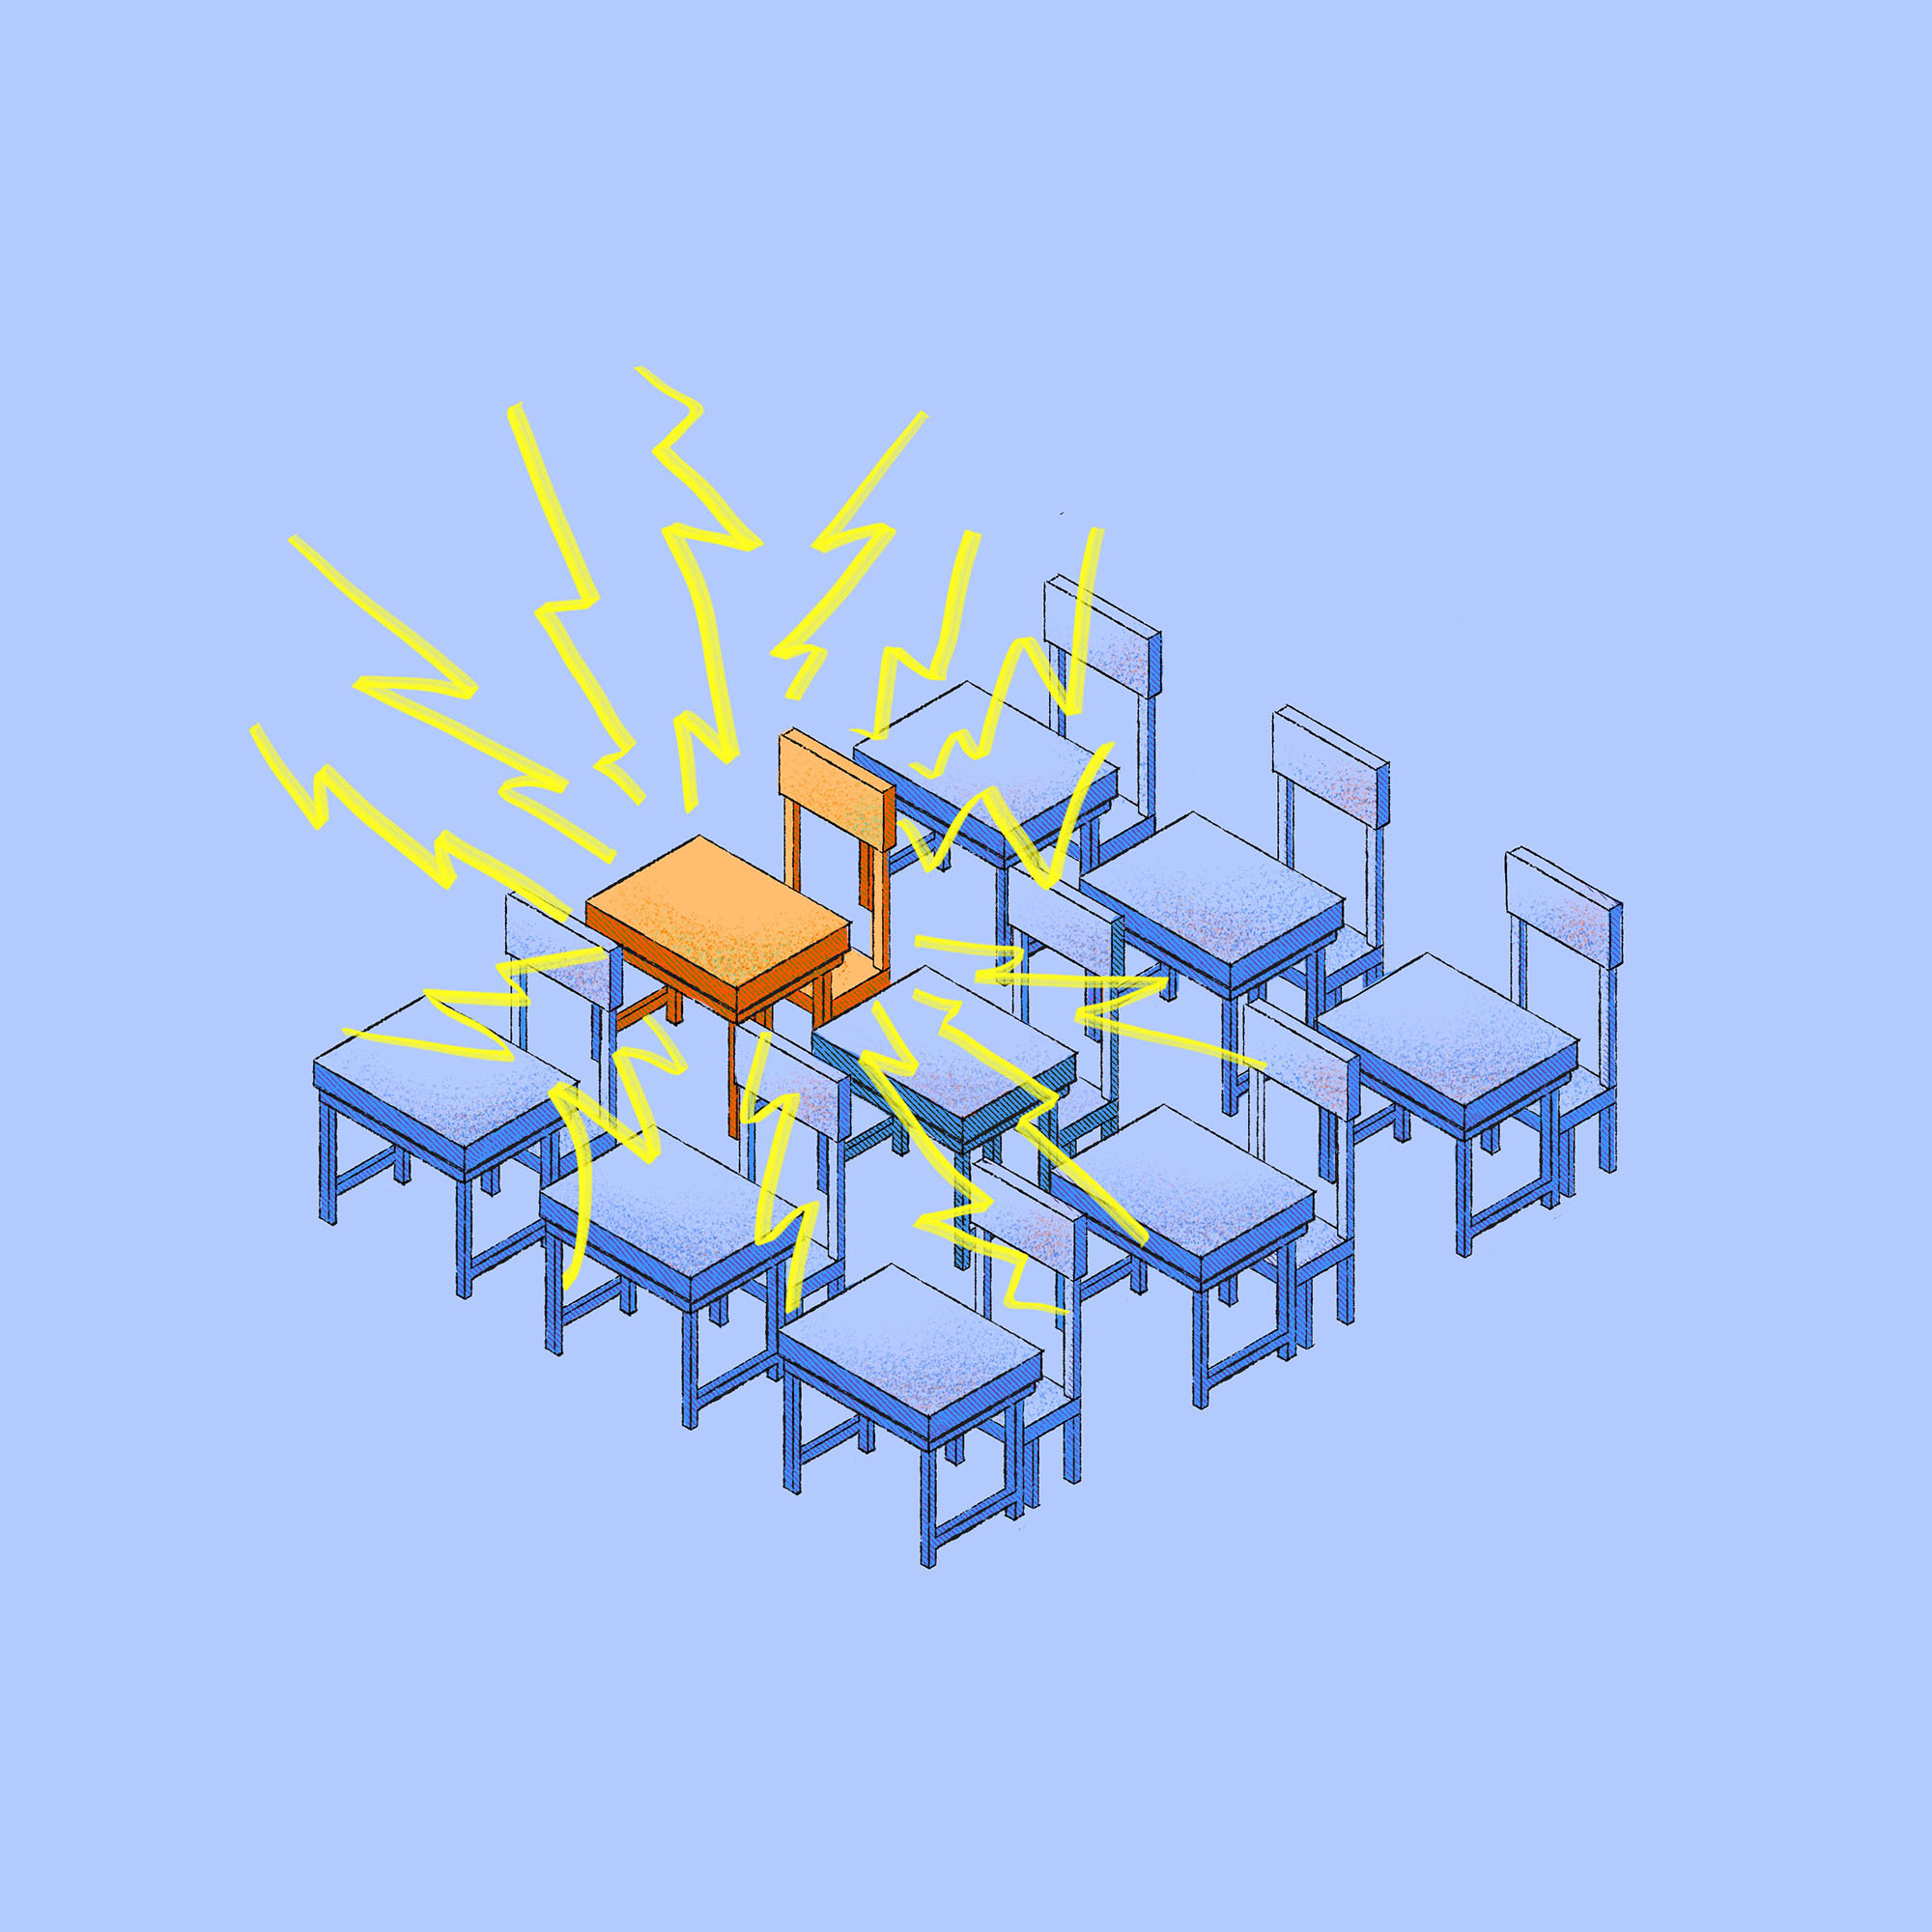 Illustration of a distressed chair in the midst of other chairs.